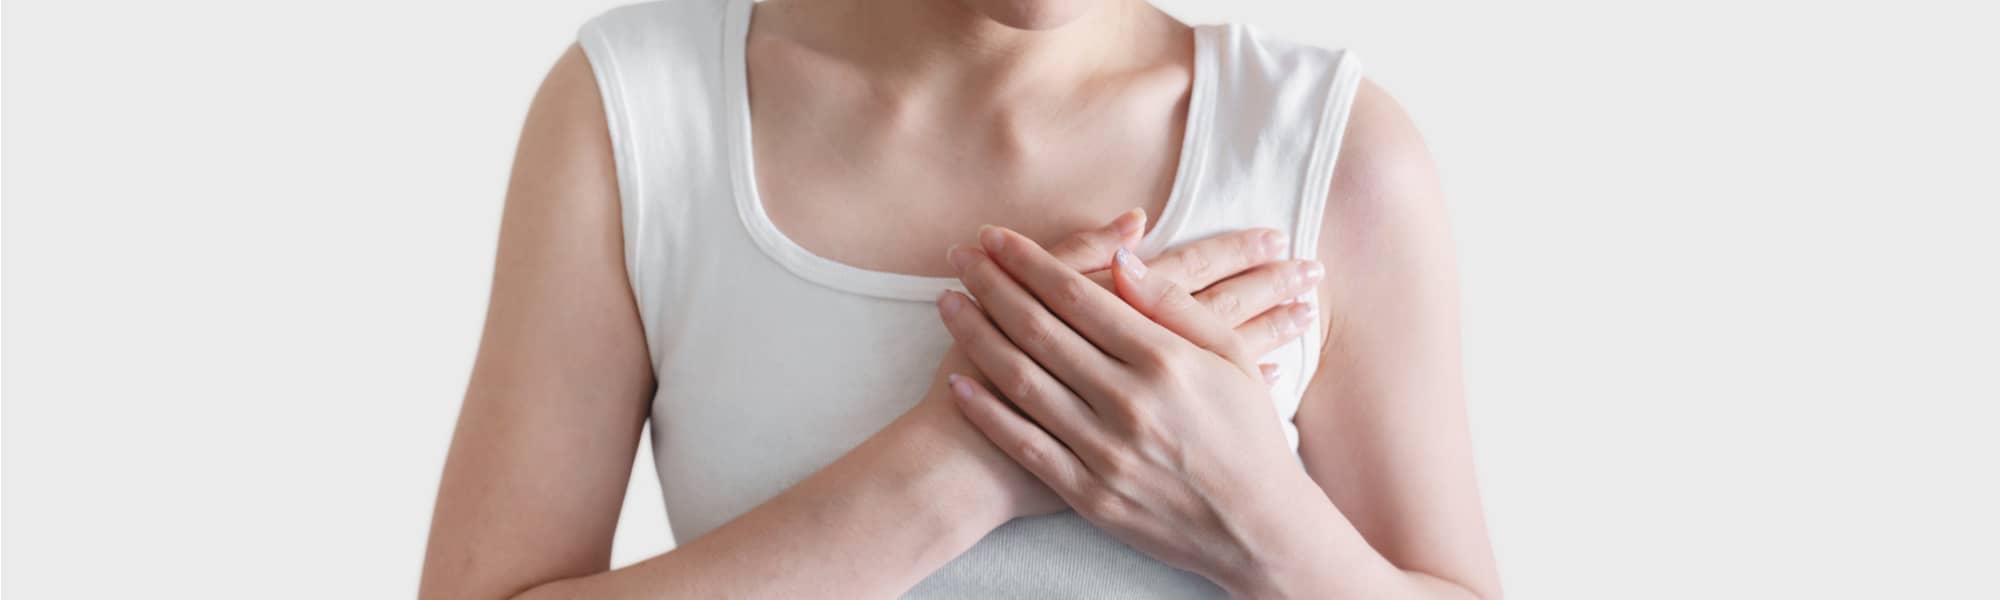 Can Constipation Cause Chest Pain? A Possible Link